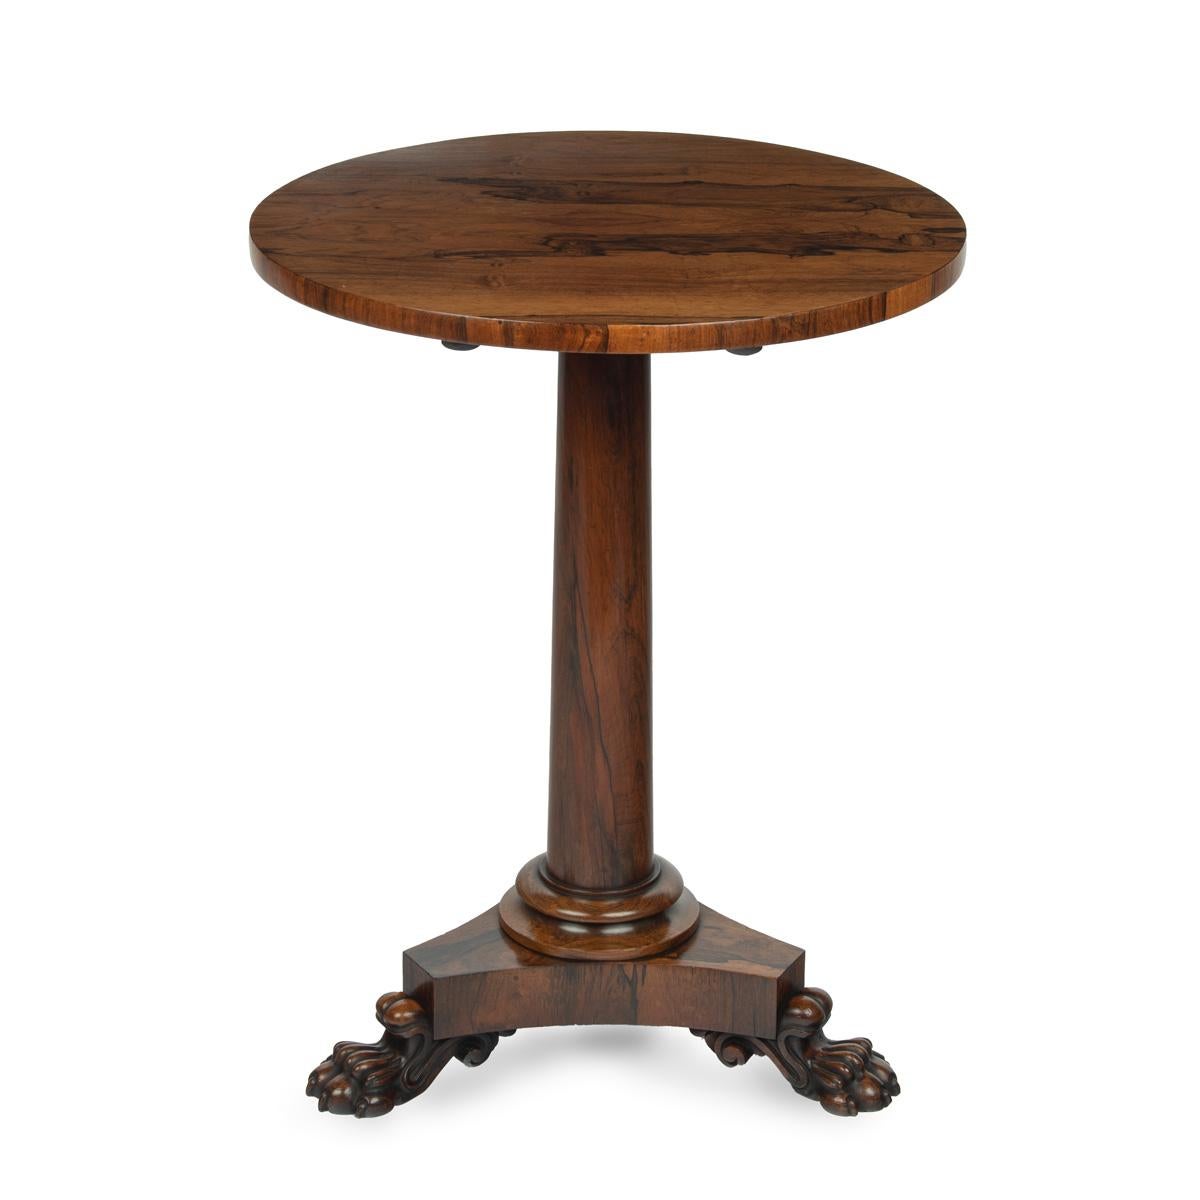 A William IV circular occasional tilt-top table, the figured rosewood top raised on a tapered column, the tripod base with three powerful lion’s paw feet.  English, circa 1830.

